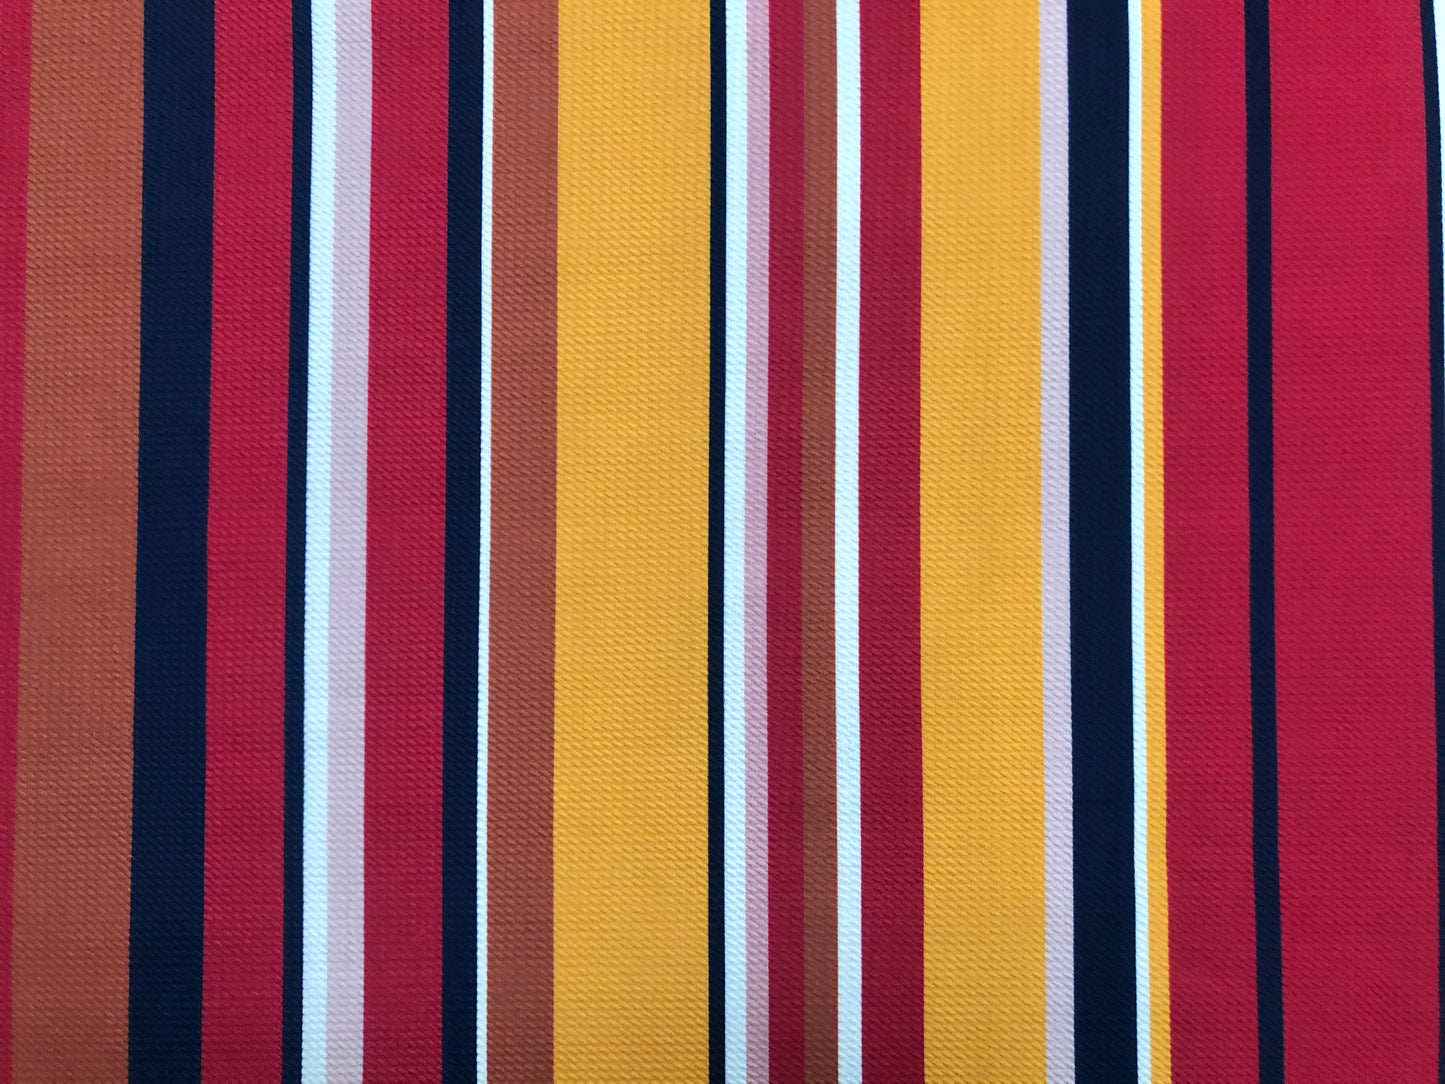 Bullet Knit Printed Fabric-Mustard Red Brown Stripes-BPR219-Sold by the Yard-Bulk Available